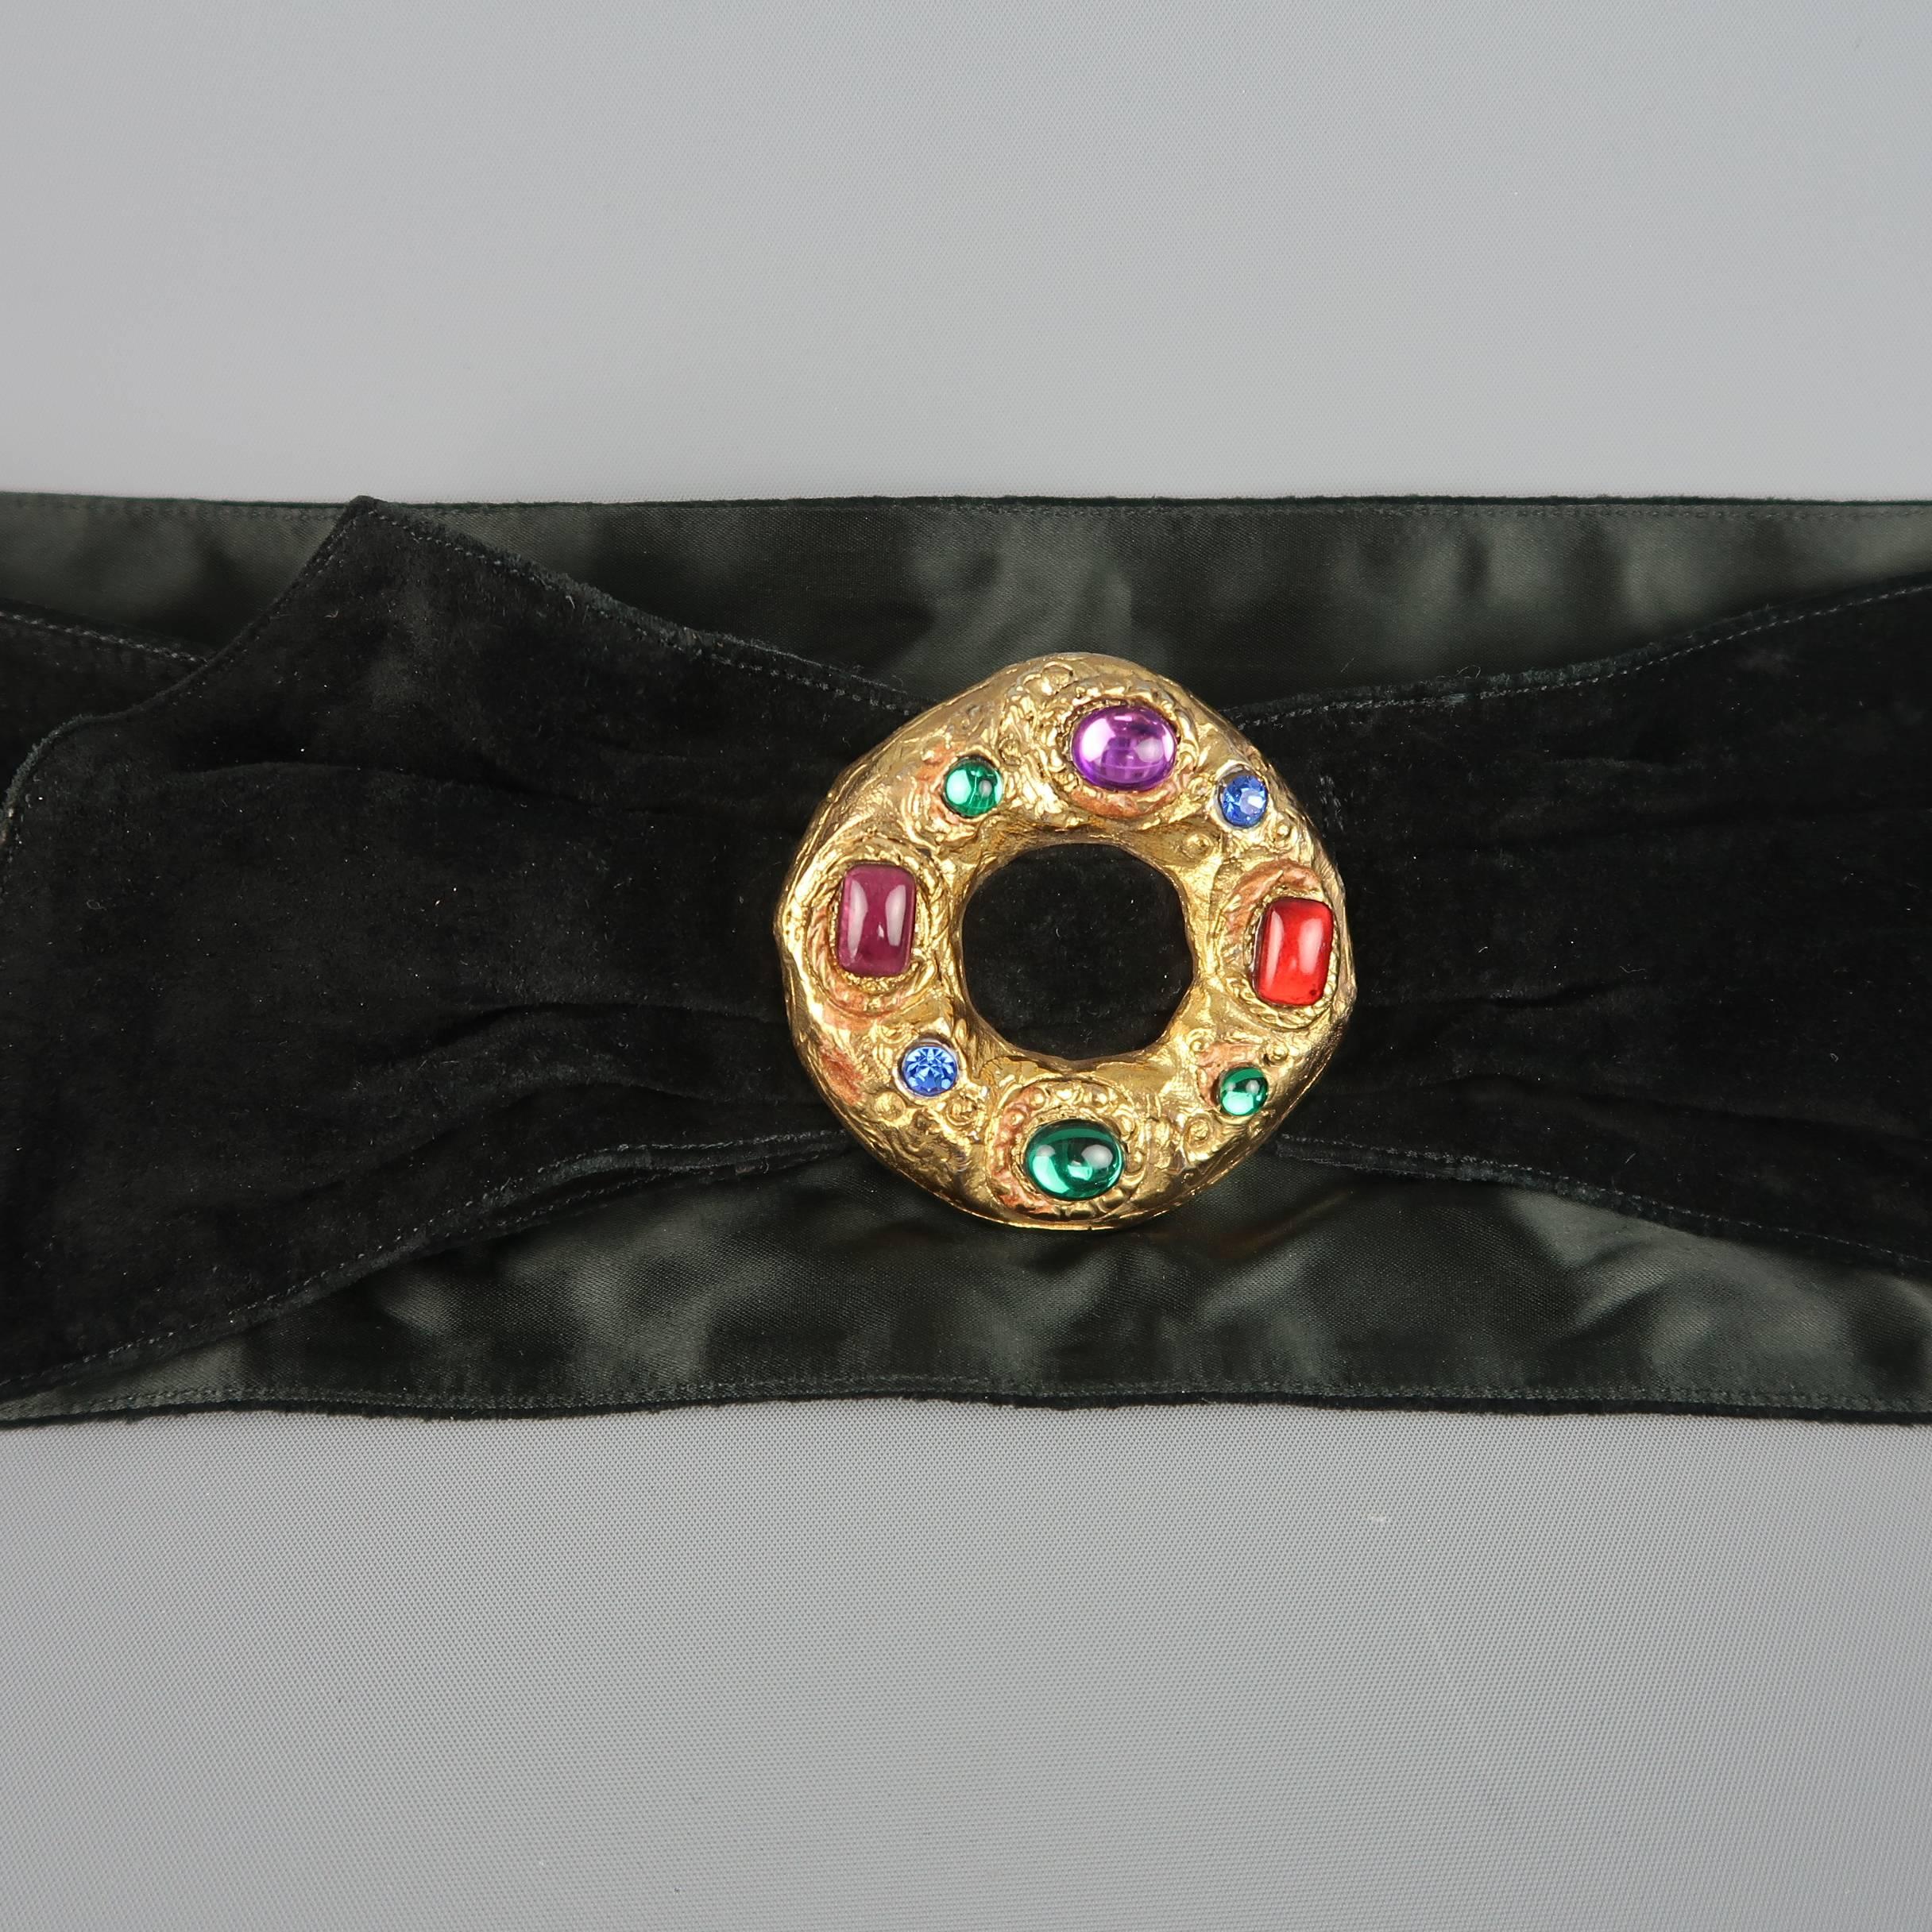 Vintage 1980's UNGARO belt features a gathered suede sash, gold tone Byzantine style hoop brooch with muti-color faux crystals, and velcro closure. Wear on brooch. As-is. Made in France.
 
Good Pre-Owned Condition.
Marked: EU 42
 
Length: 36